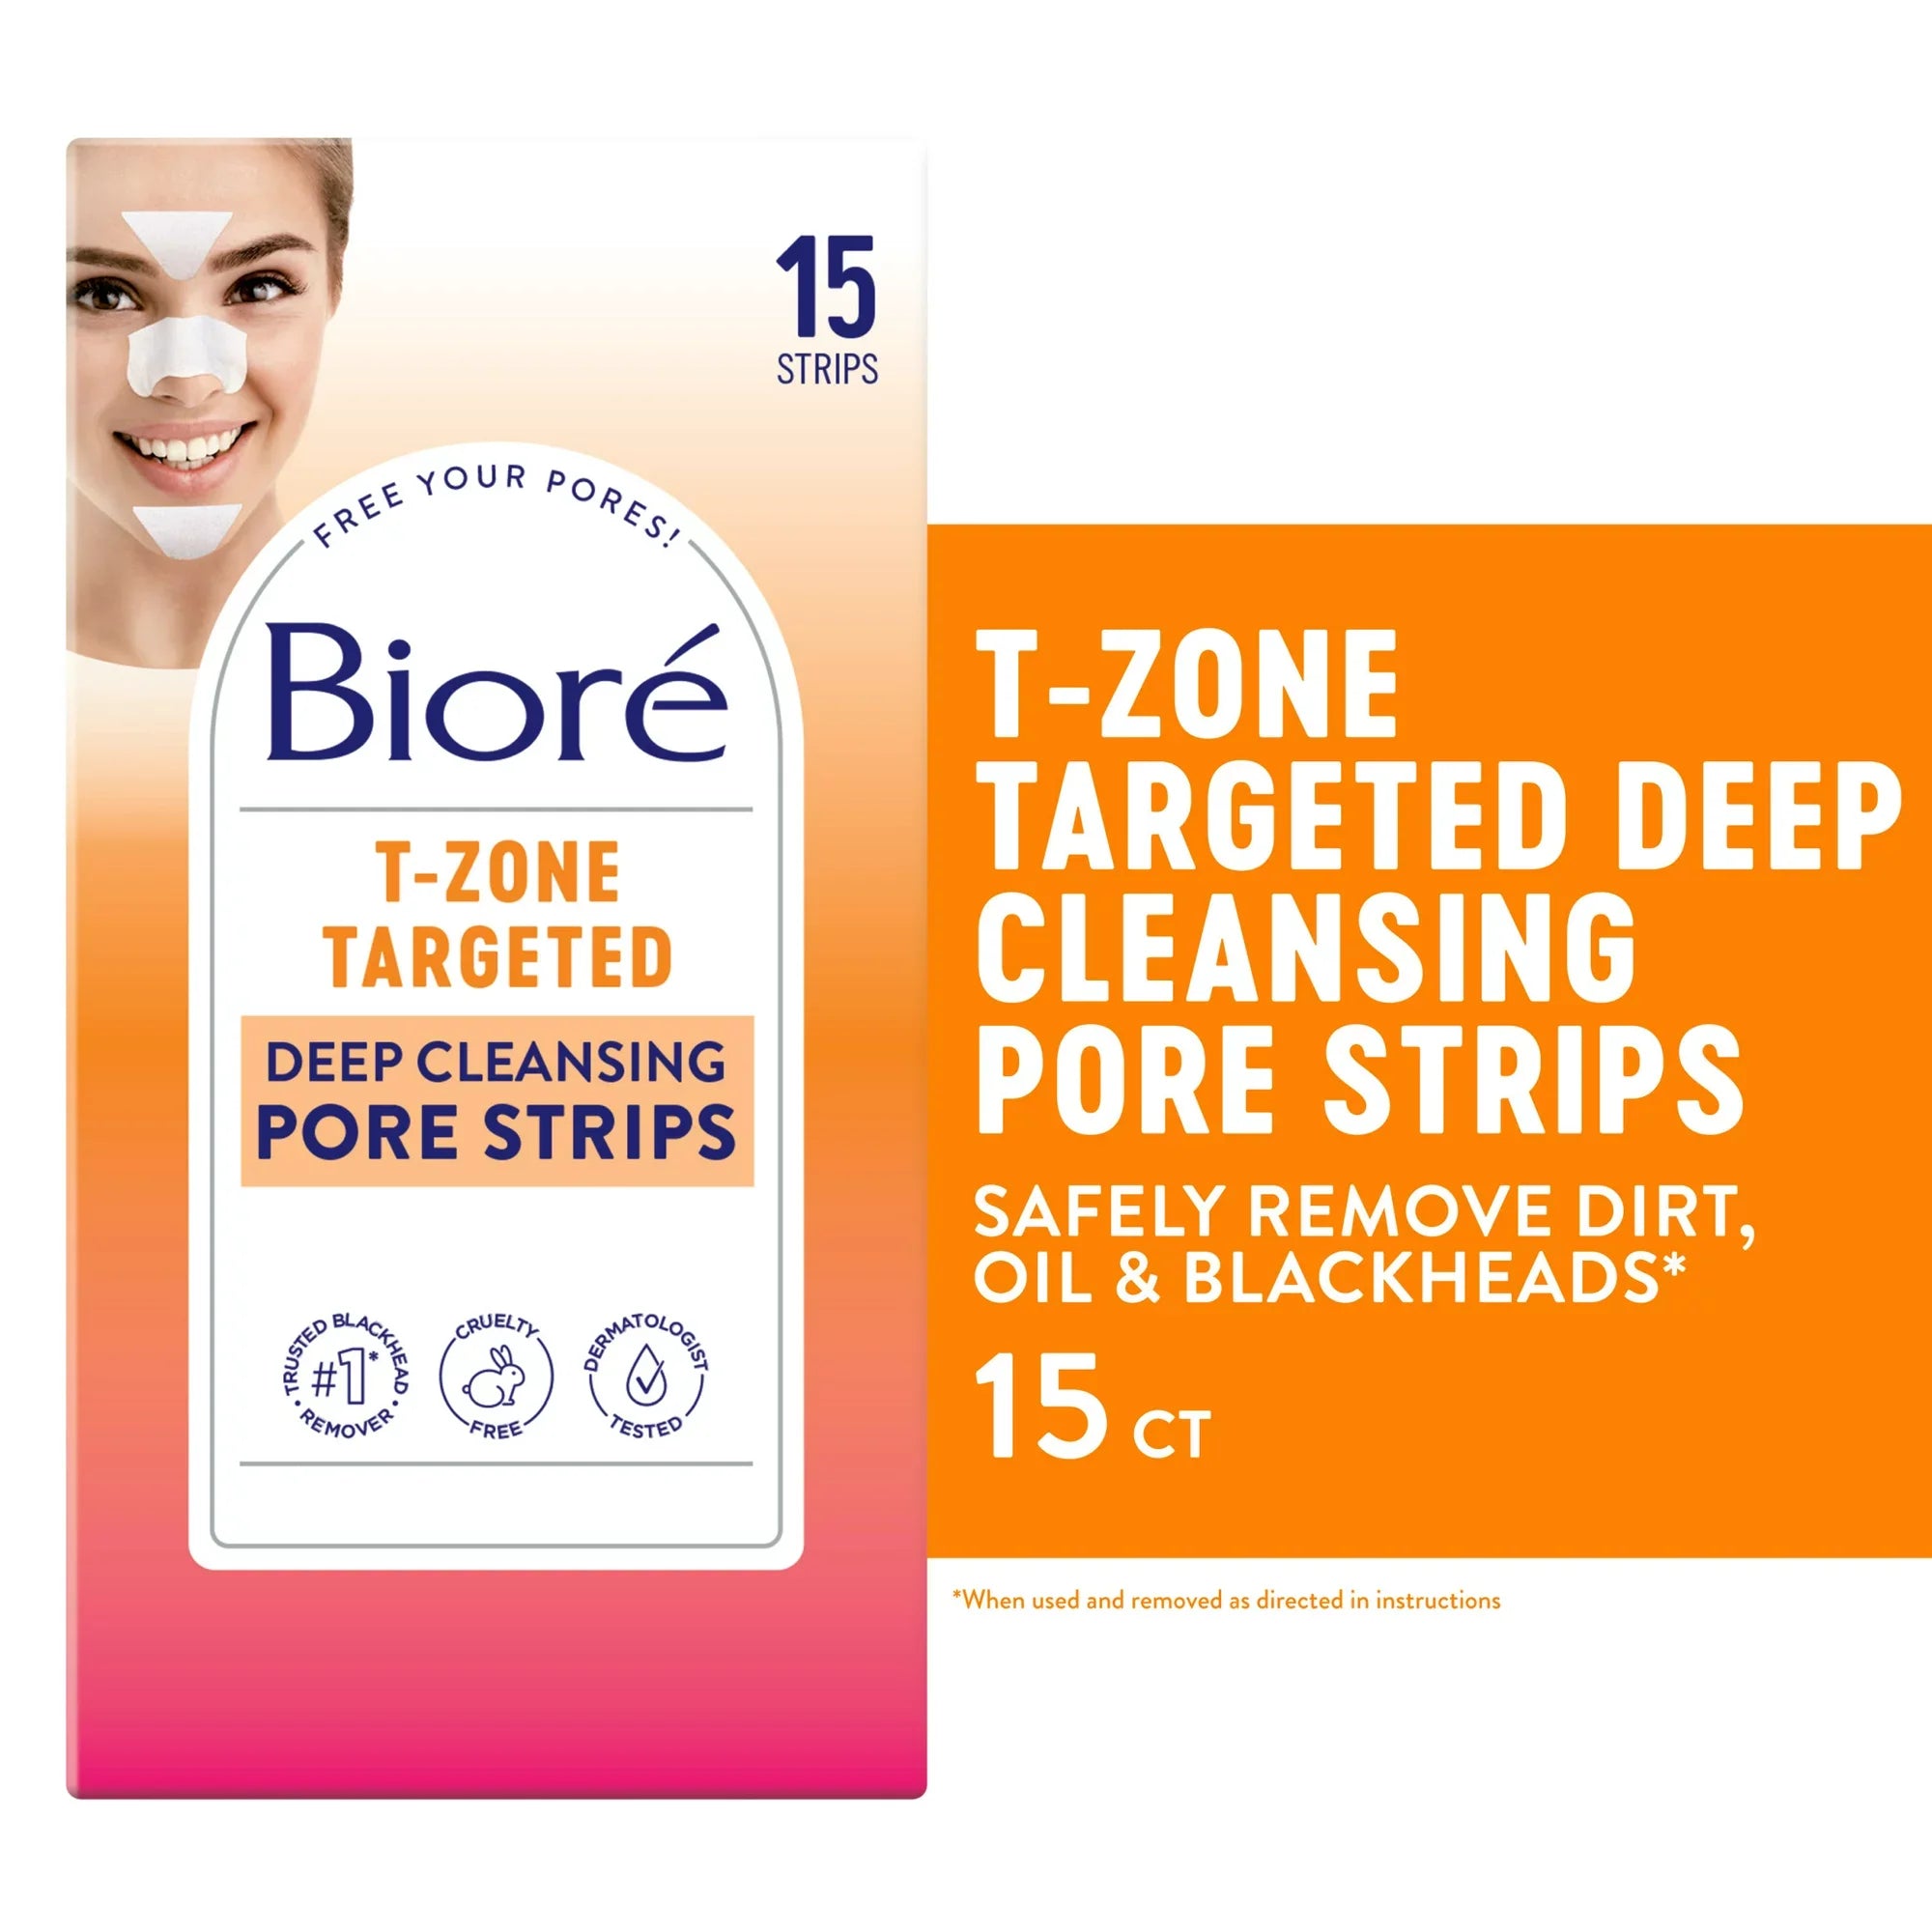 Wholesale prices with free shipping all over United States Biore T-Zone Targeted Deep Cleansing Blackhead Remover Pore Strips, 5 Nose + 5 Face + 5 Chin Strips, 15 Ct - Steven Deals